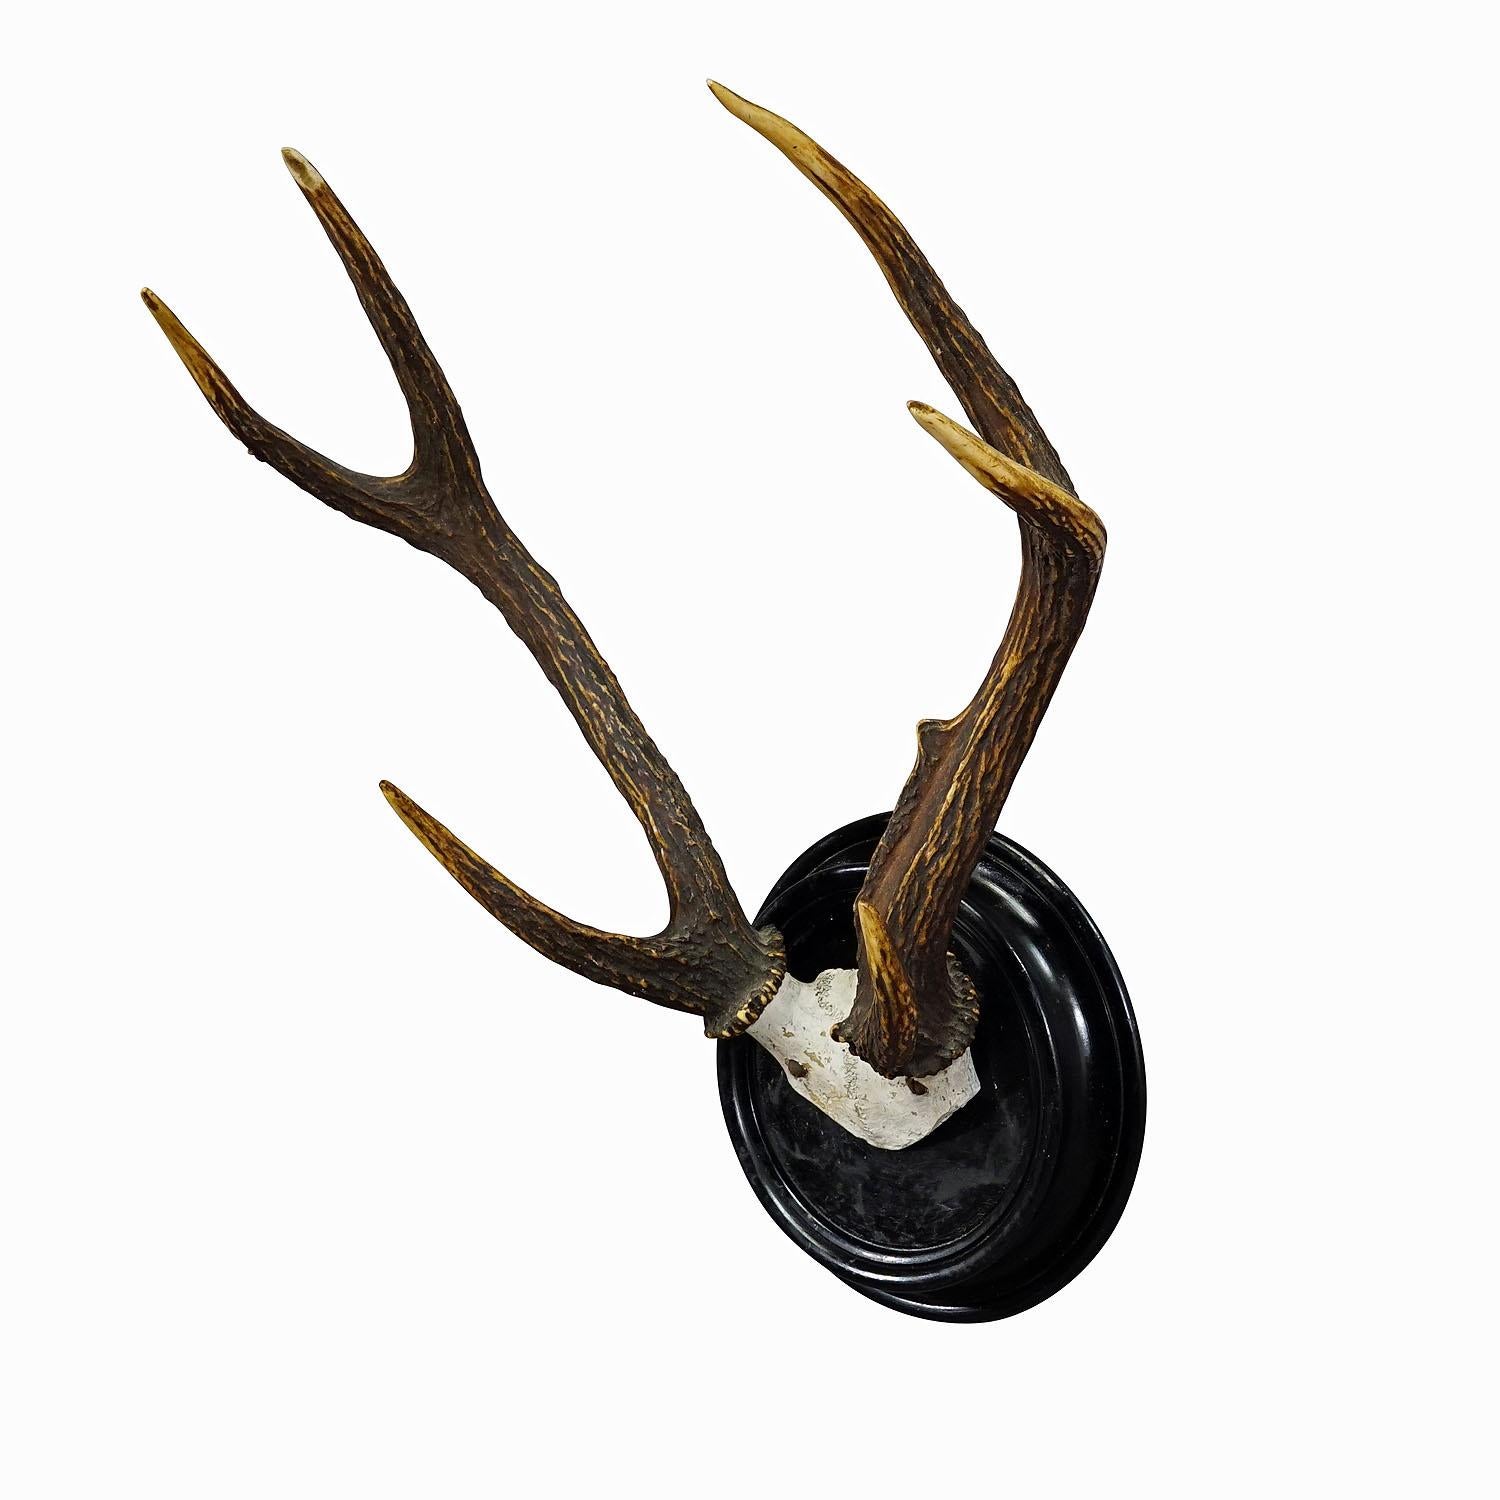 Black Forest Sika Deer Trophy on Wooden Plaque - Germany ca. 1900s
Item e6944
An antique uneven 8 pointer sika deer (Cervus nippon) trophy from the Black Forest. The trophy was shot around 1900. The large antlers are mounted on a turned wooden wall